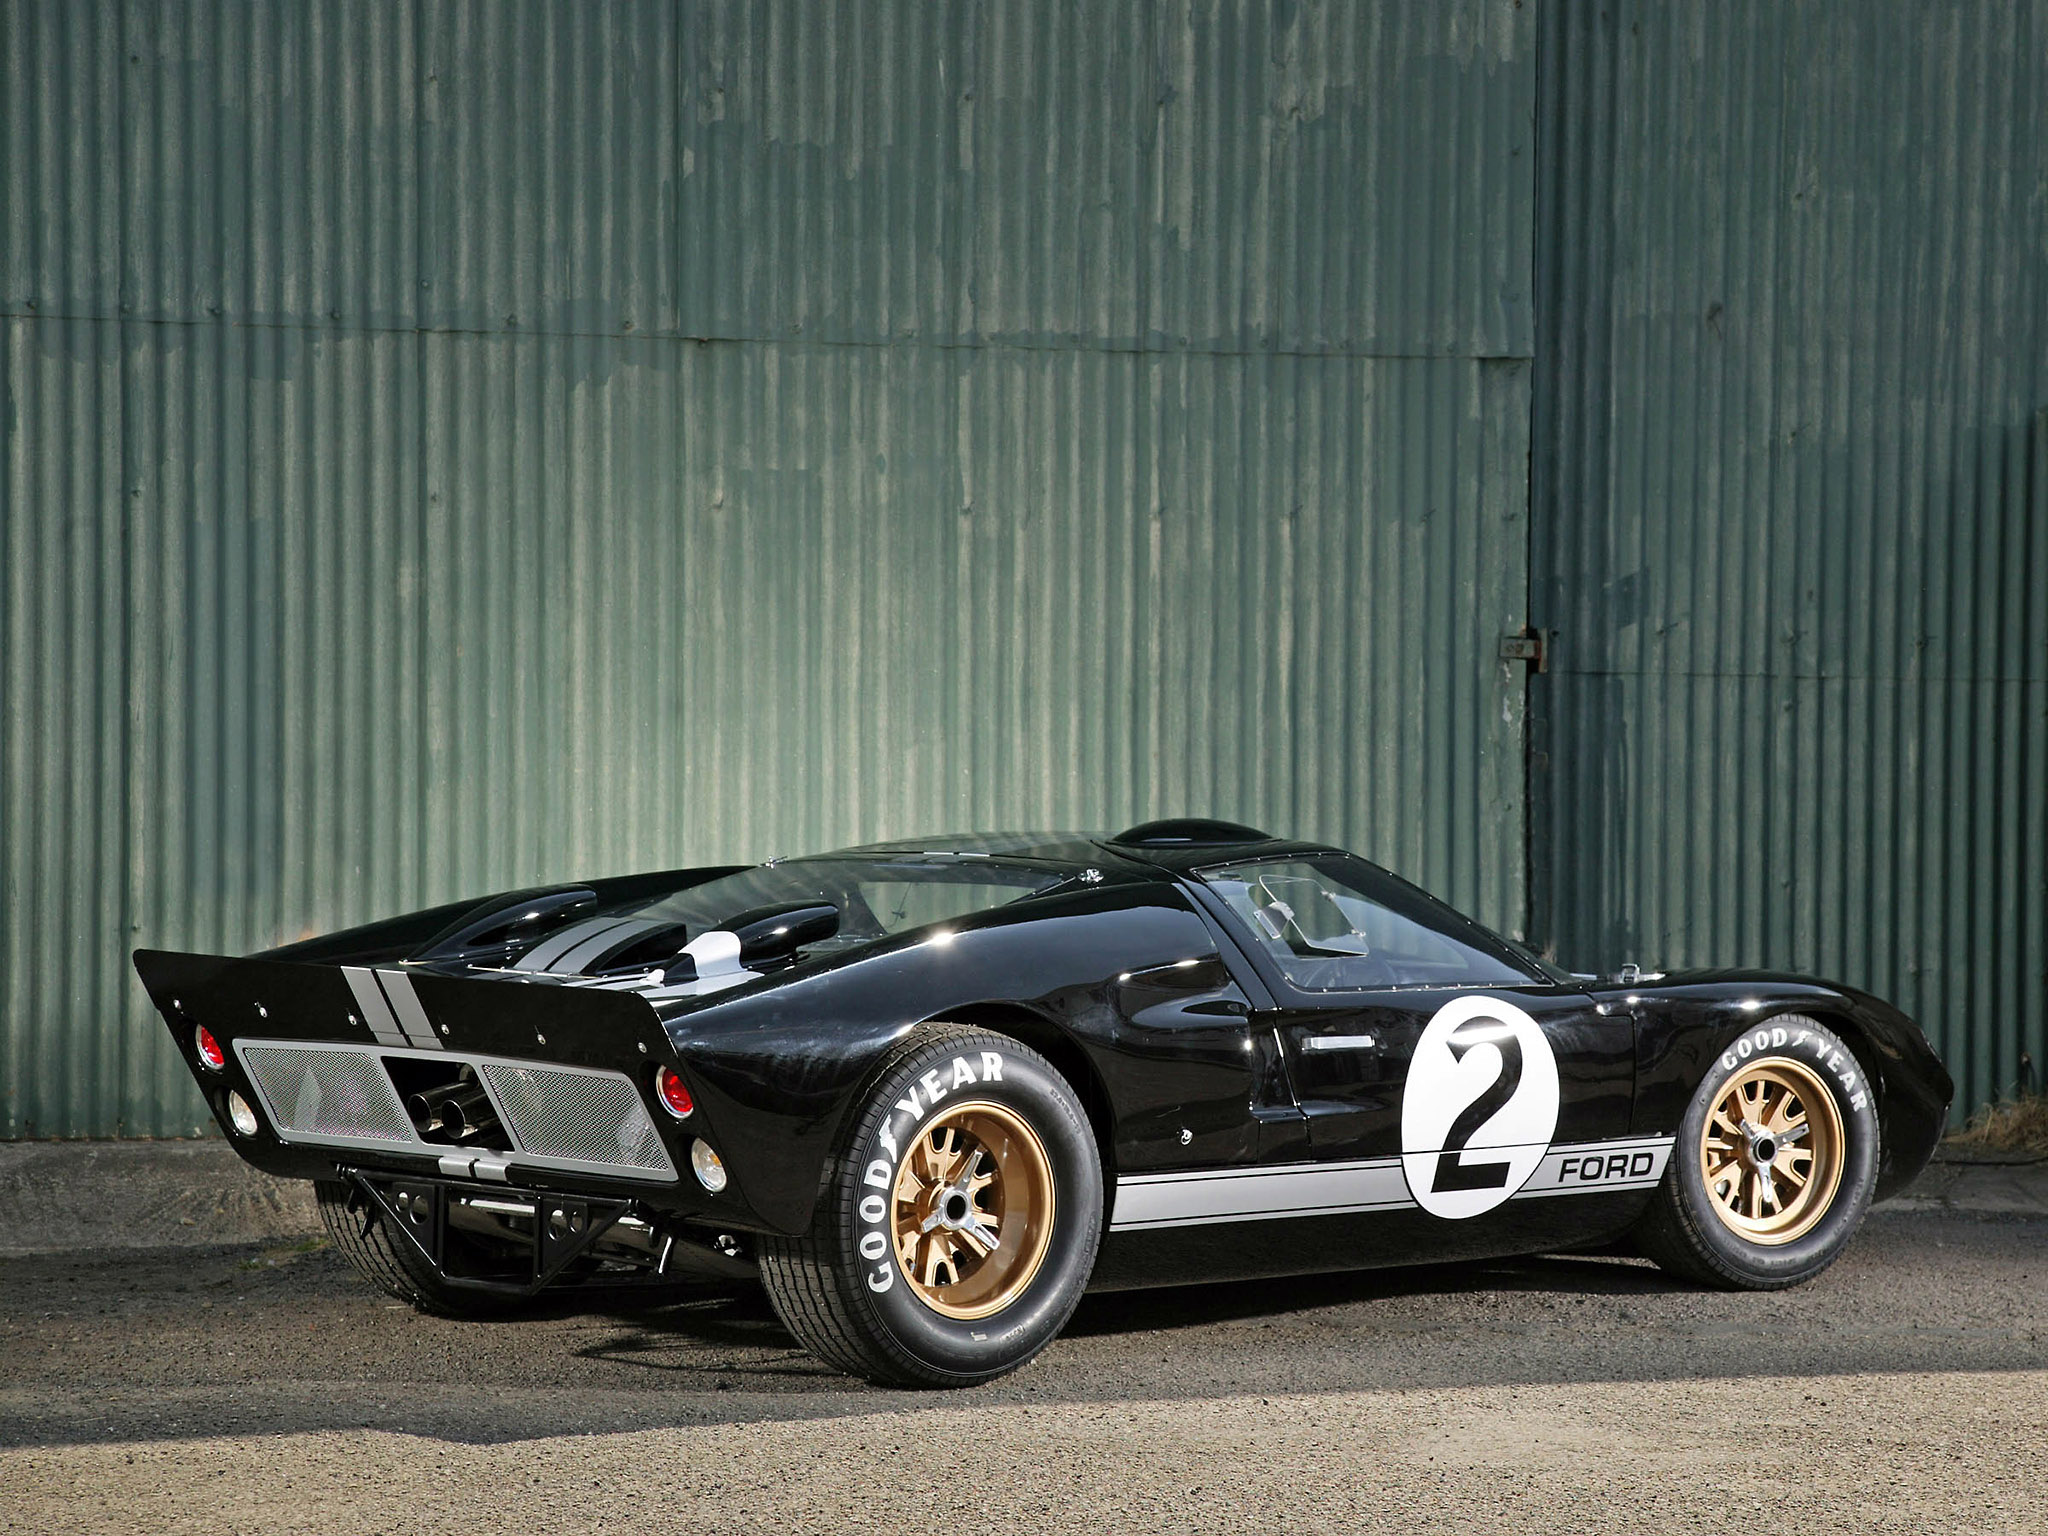 1966, Ford, Gt40, Le mans, Classic, Supercar, Supercars, Race, Racing Wallpaper